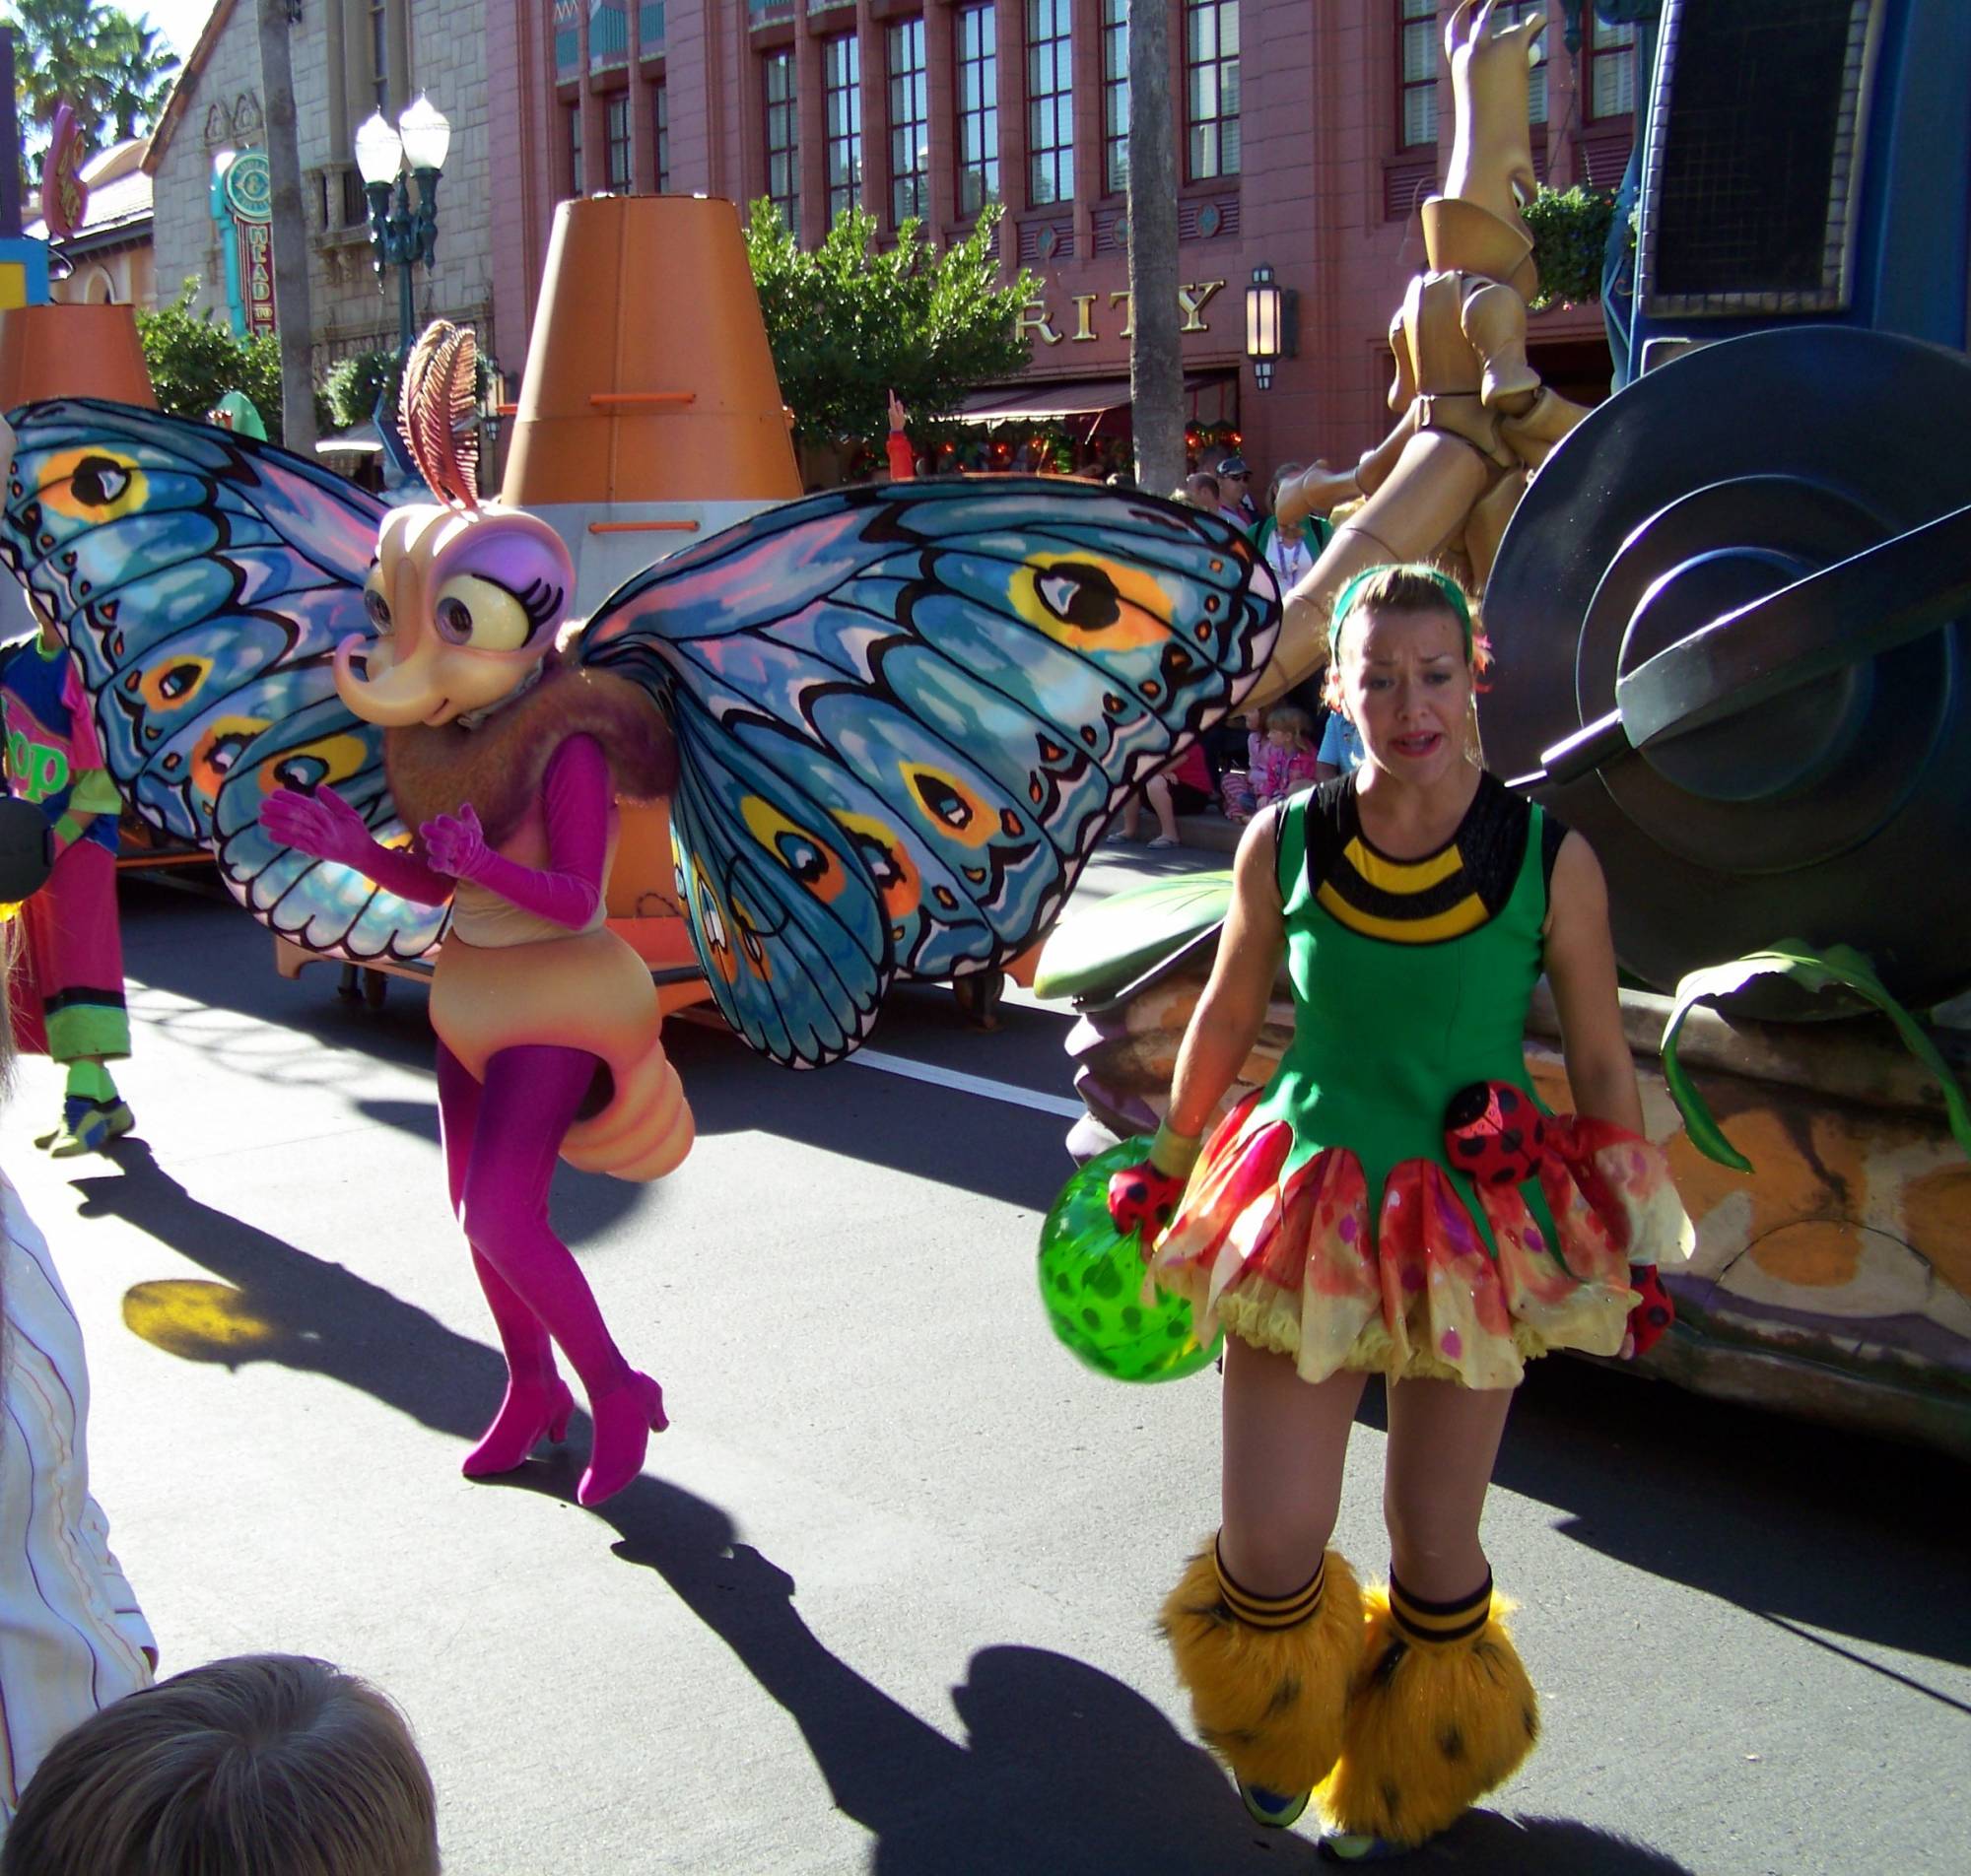 Gypsy and Performer in Disney's Hollywood Studio-Block Party Bash